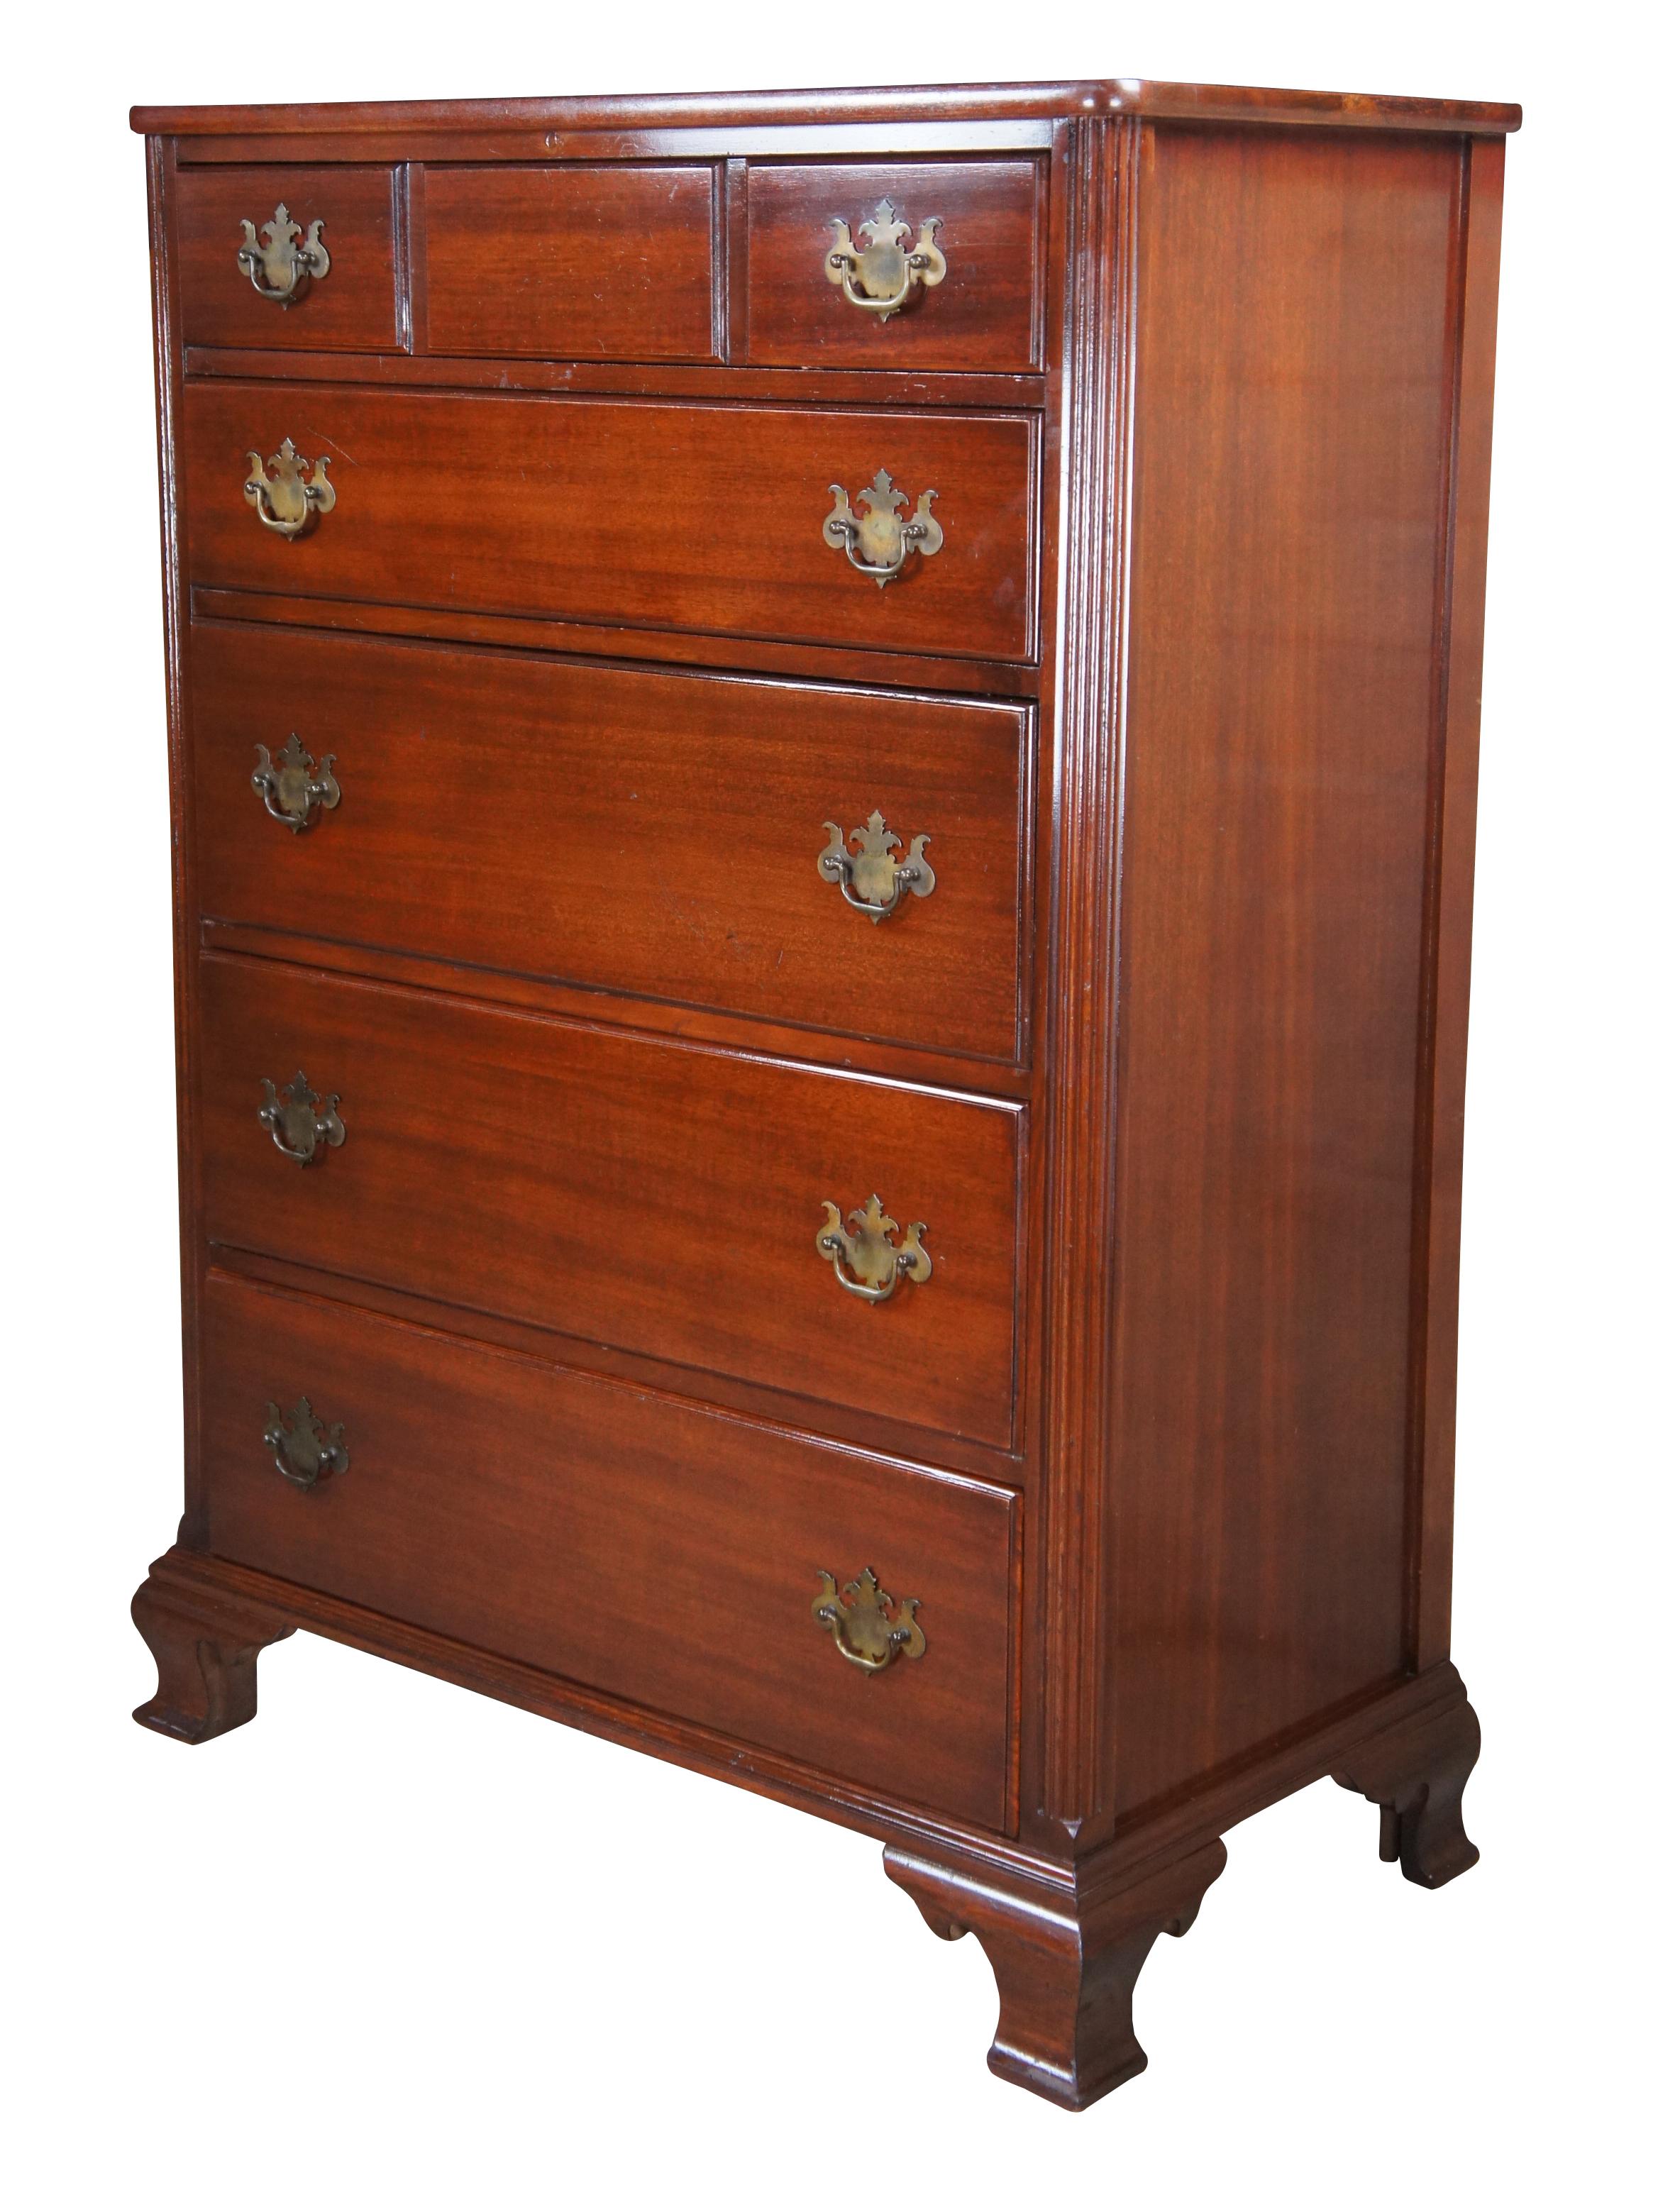 A lovely mahogany chest, circa 1940s.  Features a rectangular frame featuring 5 dovetailed drawers with Chippendale style brass bat wing drawer pulls between reeded stiles.  The case is supported by flared bracket feet.  Upper drawer is divided with